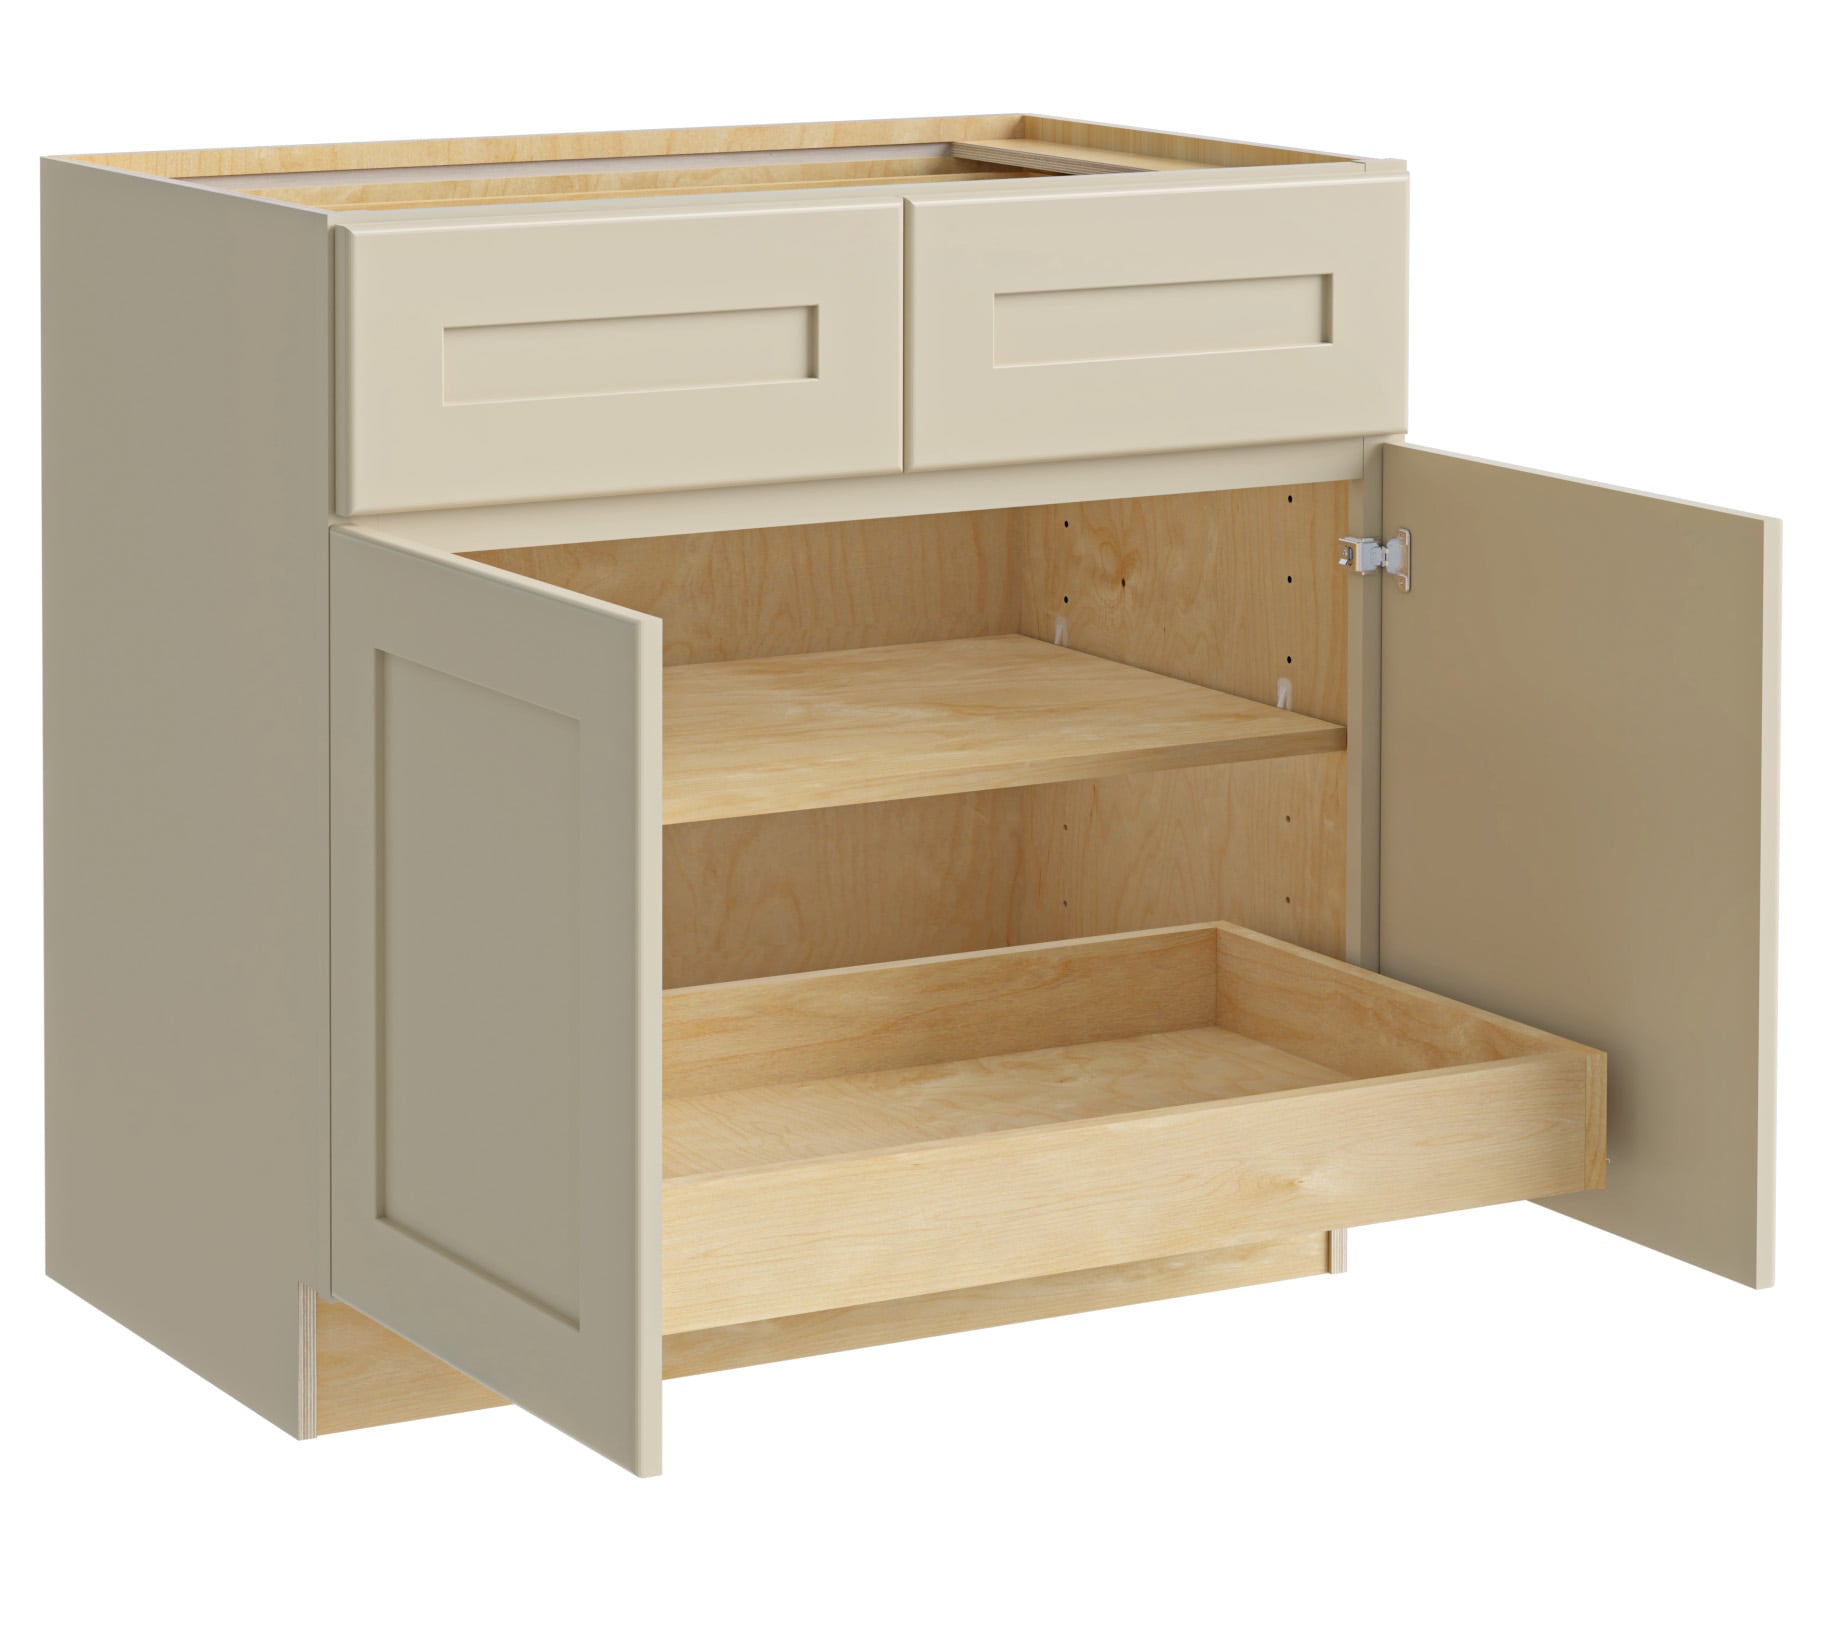 Luxxe Cabinetry 36-in W x 34.5-in H x 24-in D Norfolk Blended Cream Painted Door and Drawer Base Fully Assembled Semi-custom Cabinet in Off-White